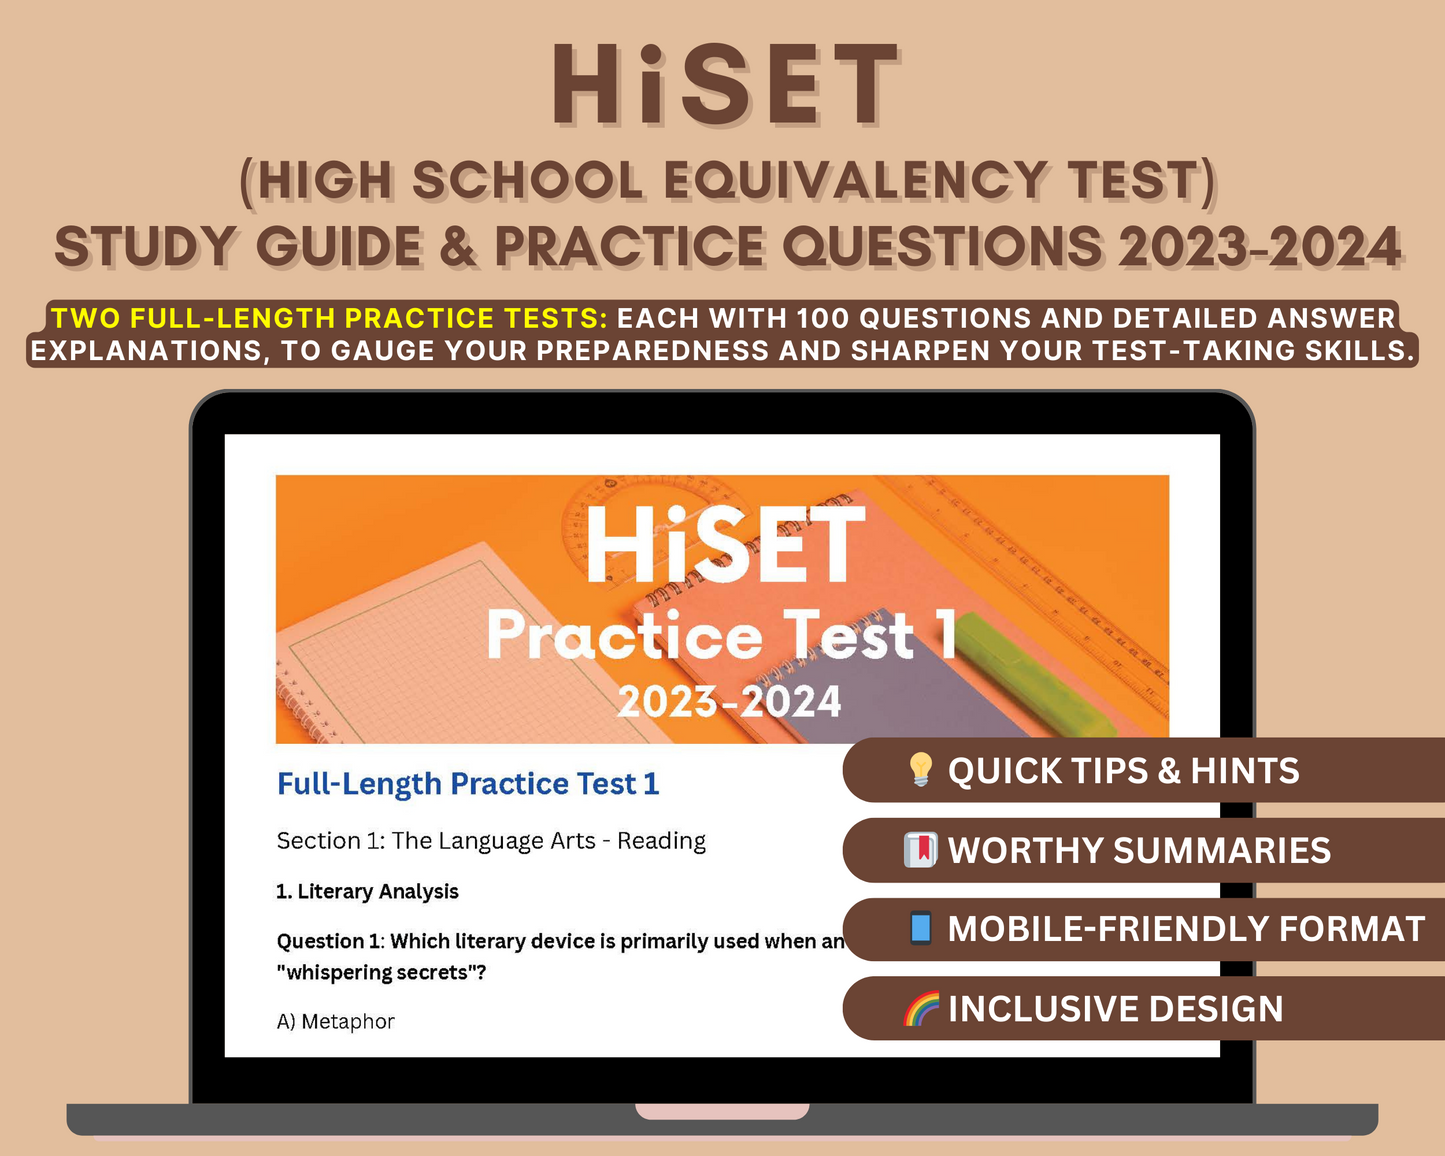 HiSET Exam Study Guide 2023-2024: In-Depth Content Review, Practice Tests & Exam Tips for High School Equivalency Test